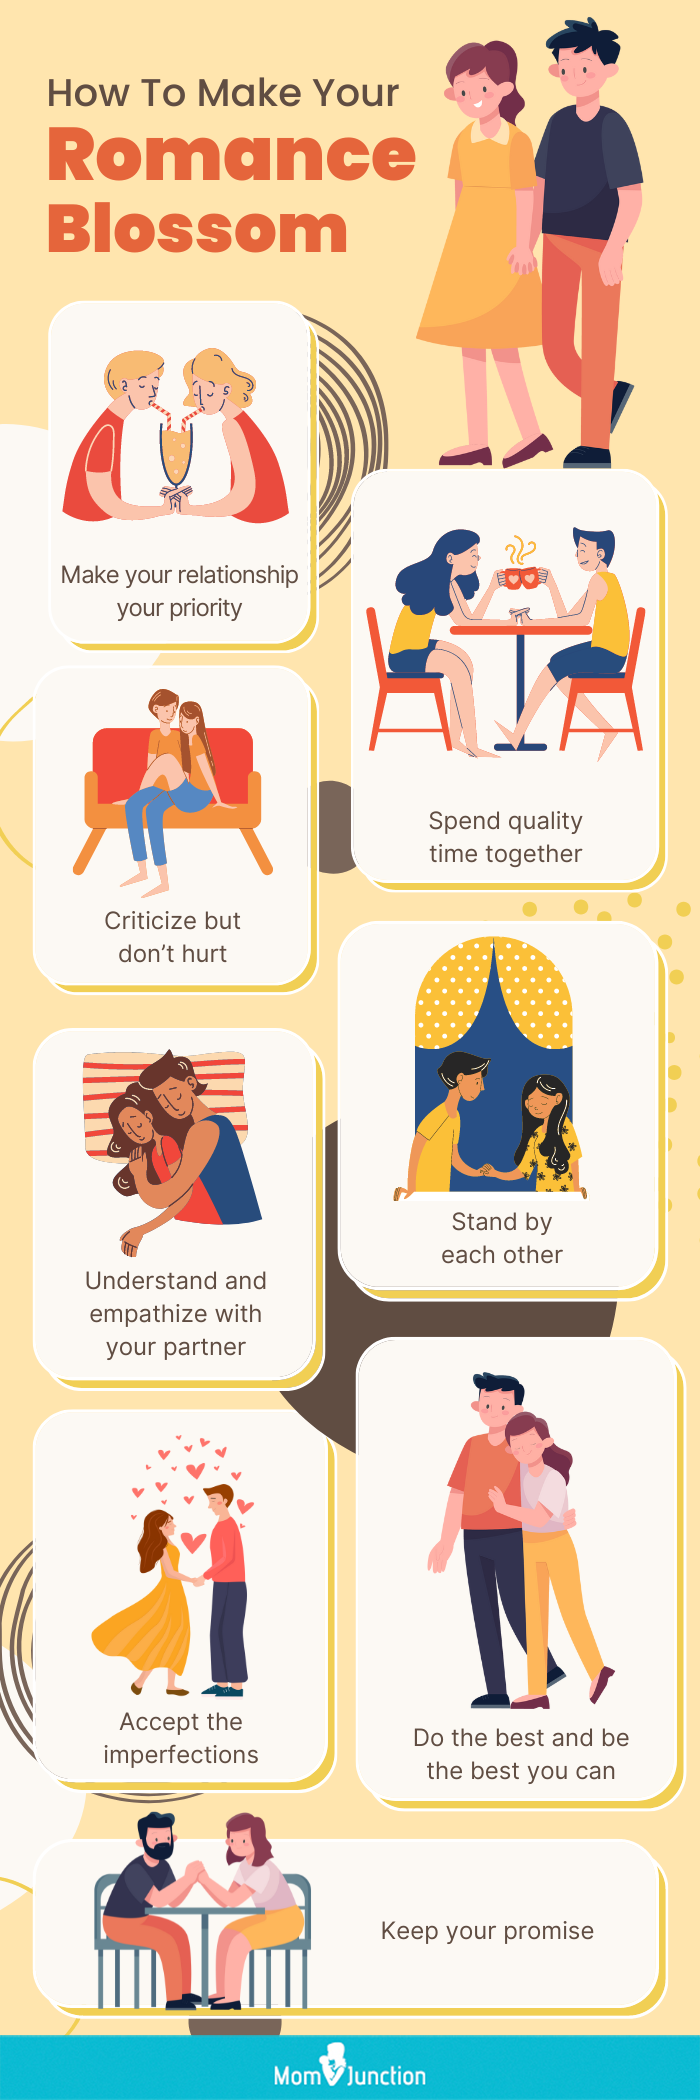 how to make your romance blossom [infographic]